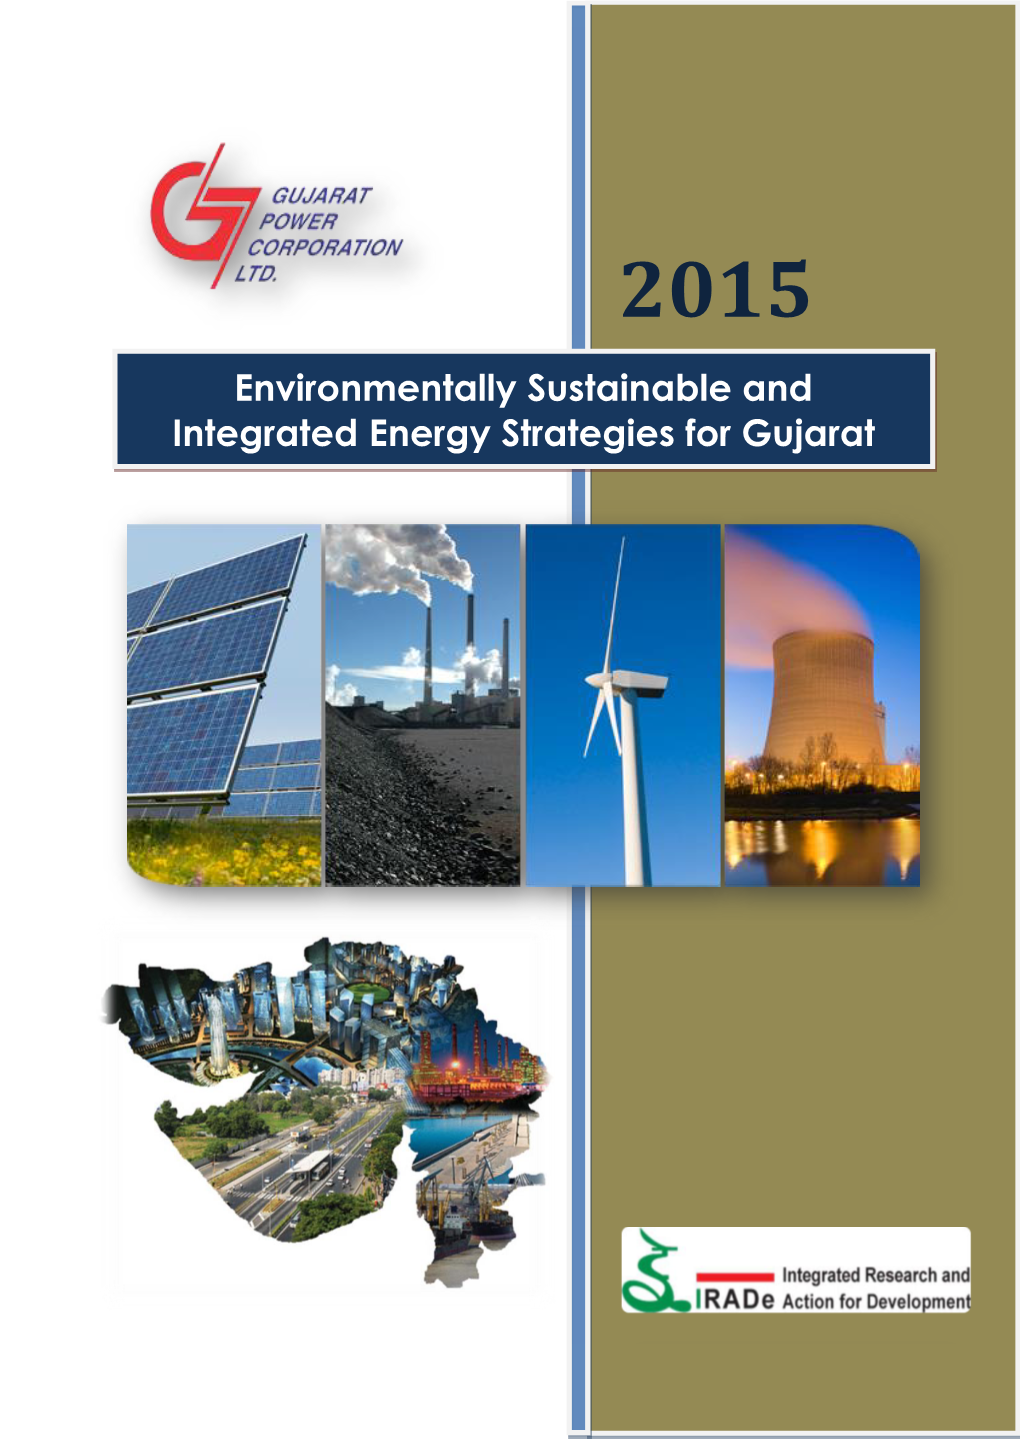 Environmentally Sustainable and Integrated Energy Plan for Gujarat